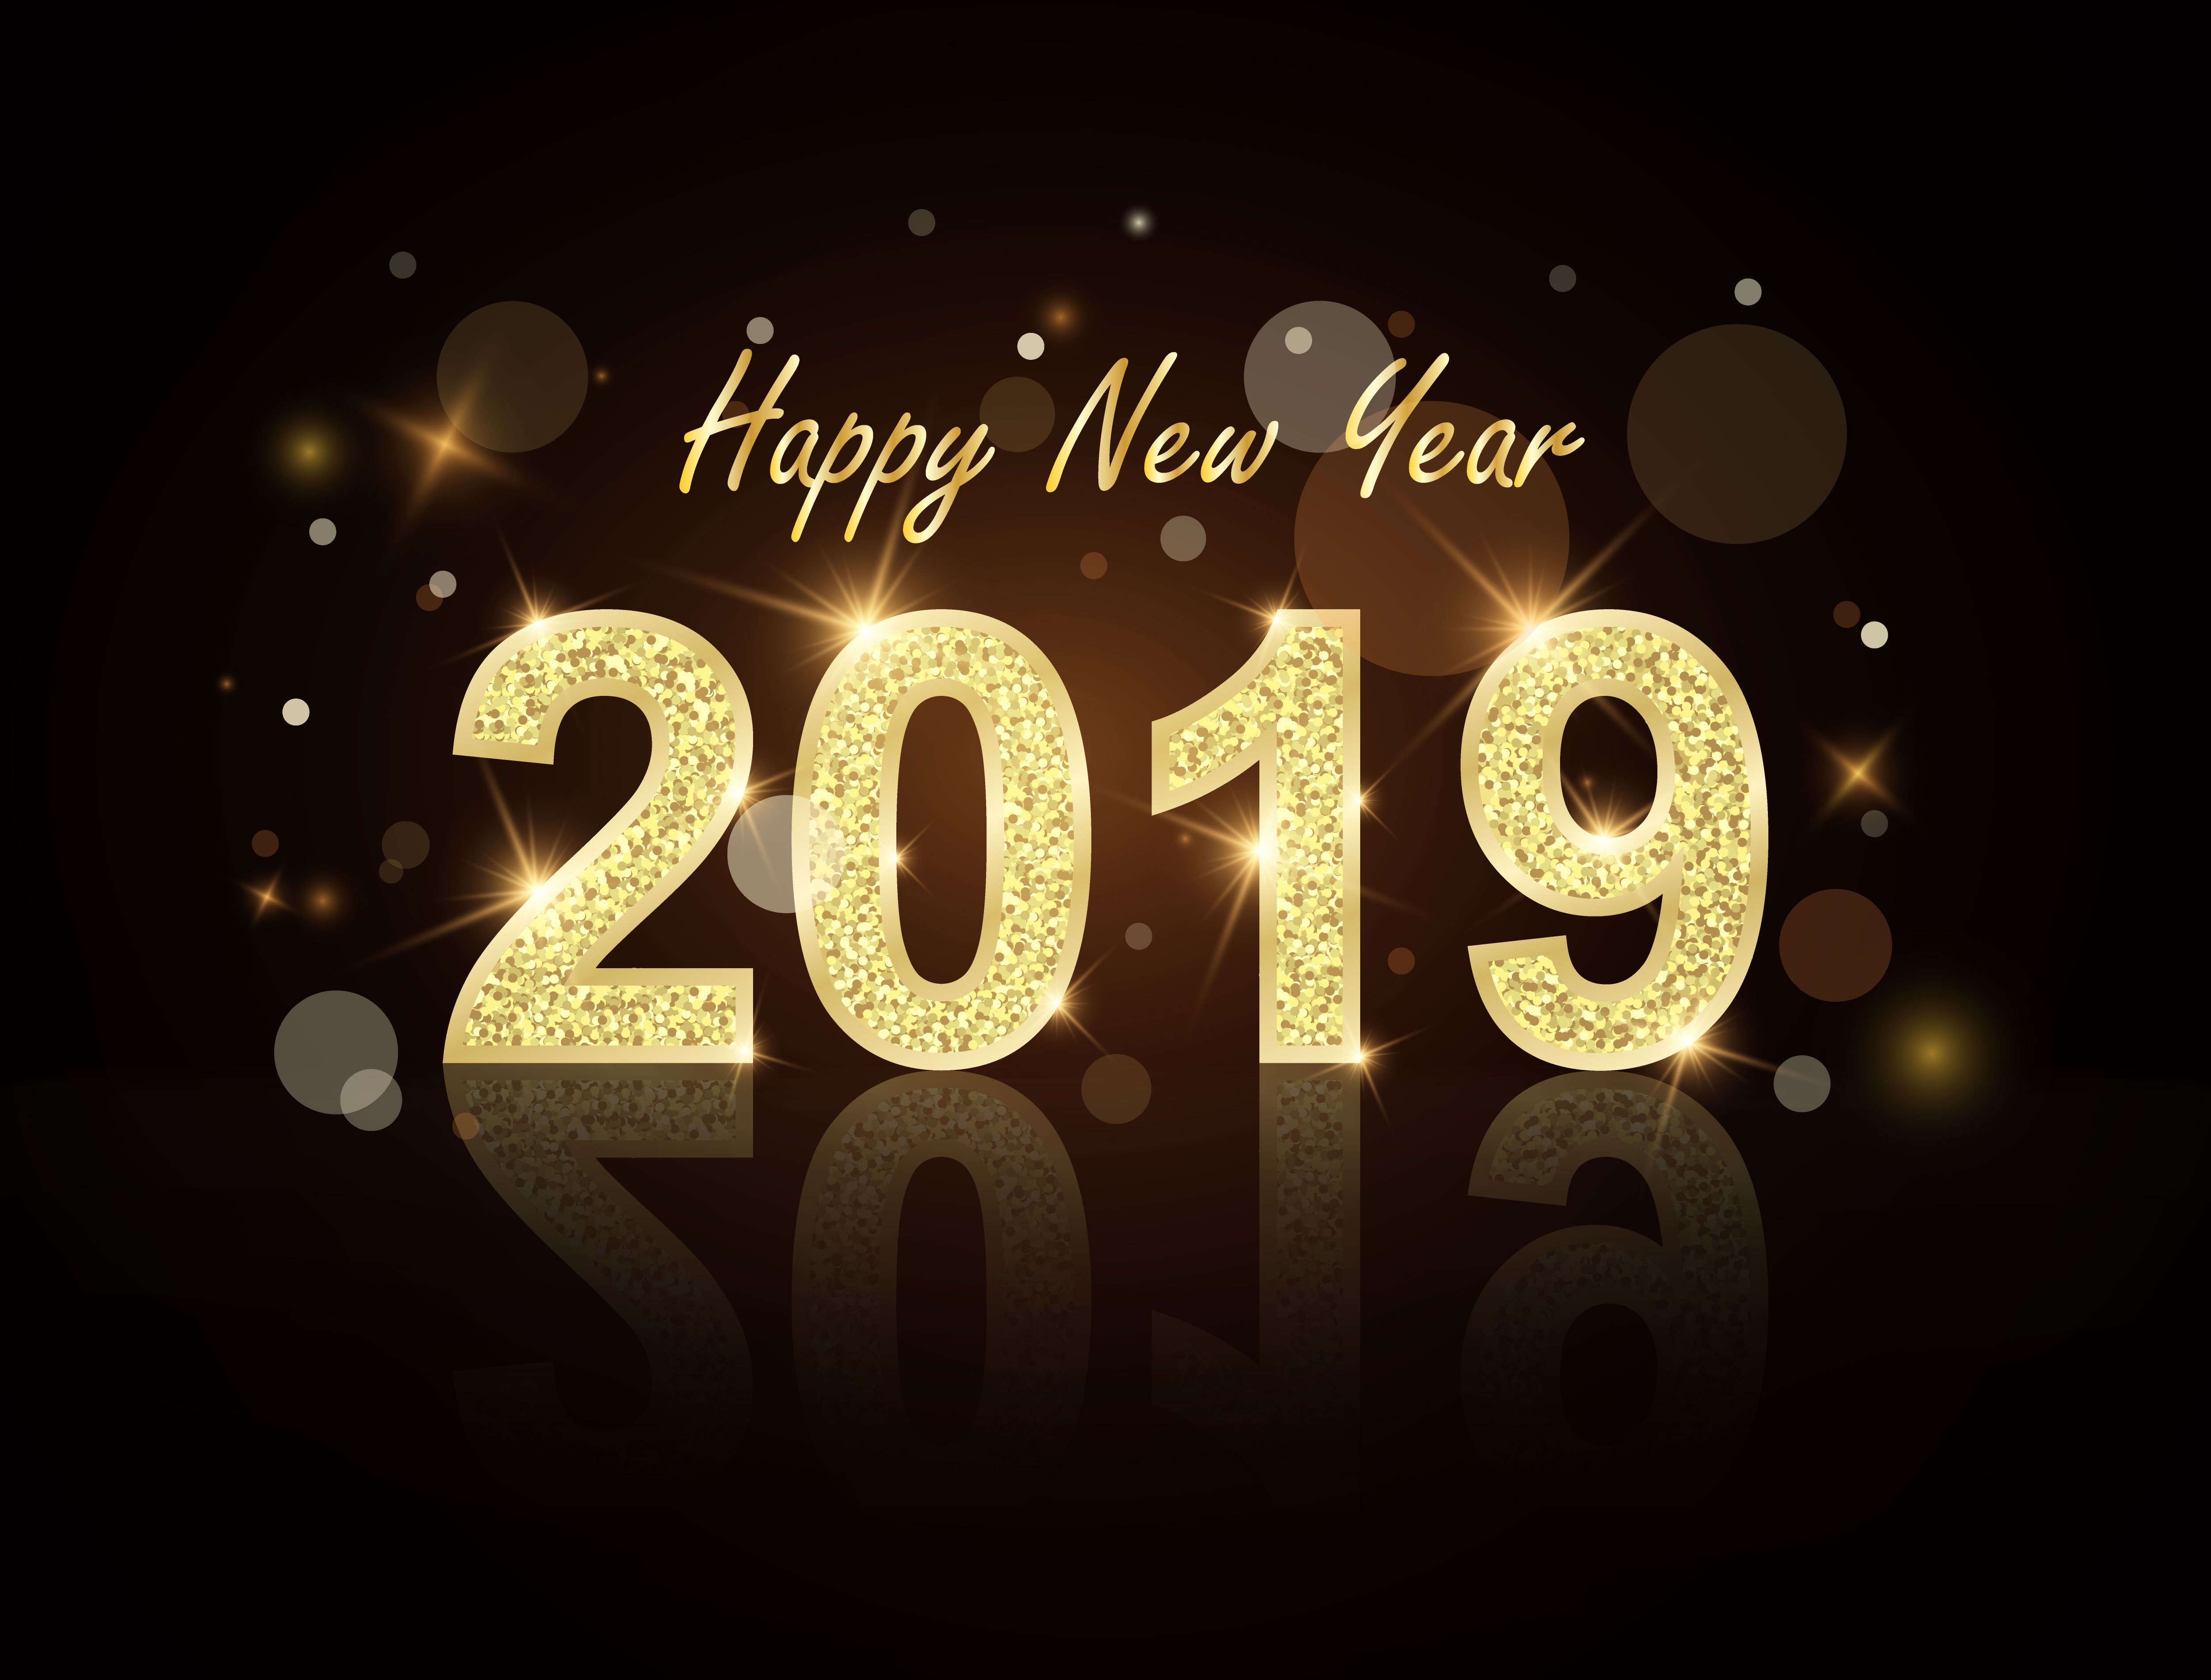 holiday, new year 2019, happy new year, new year